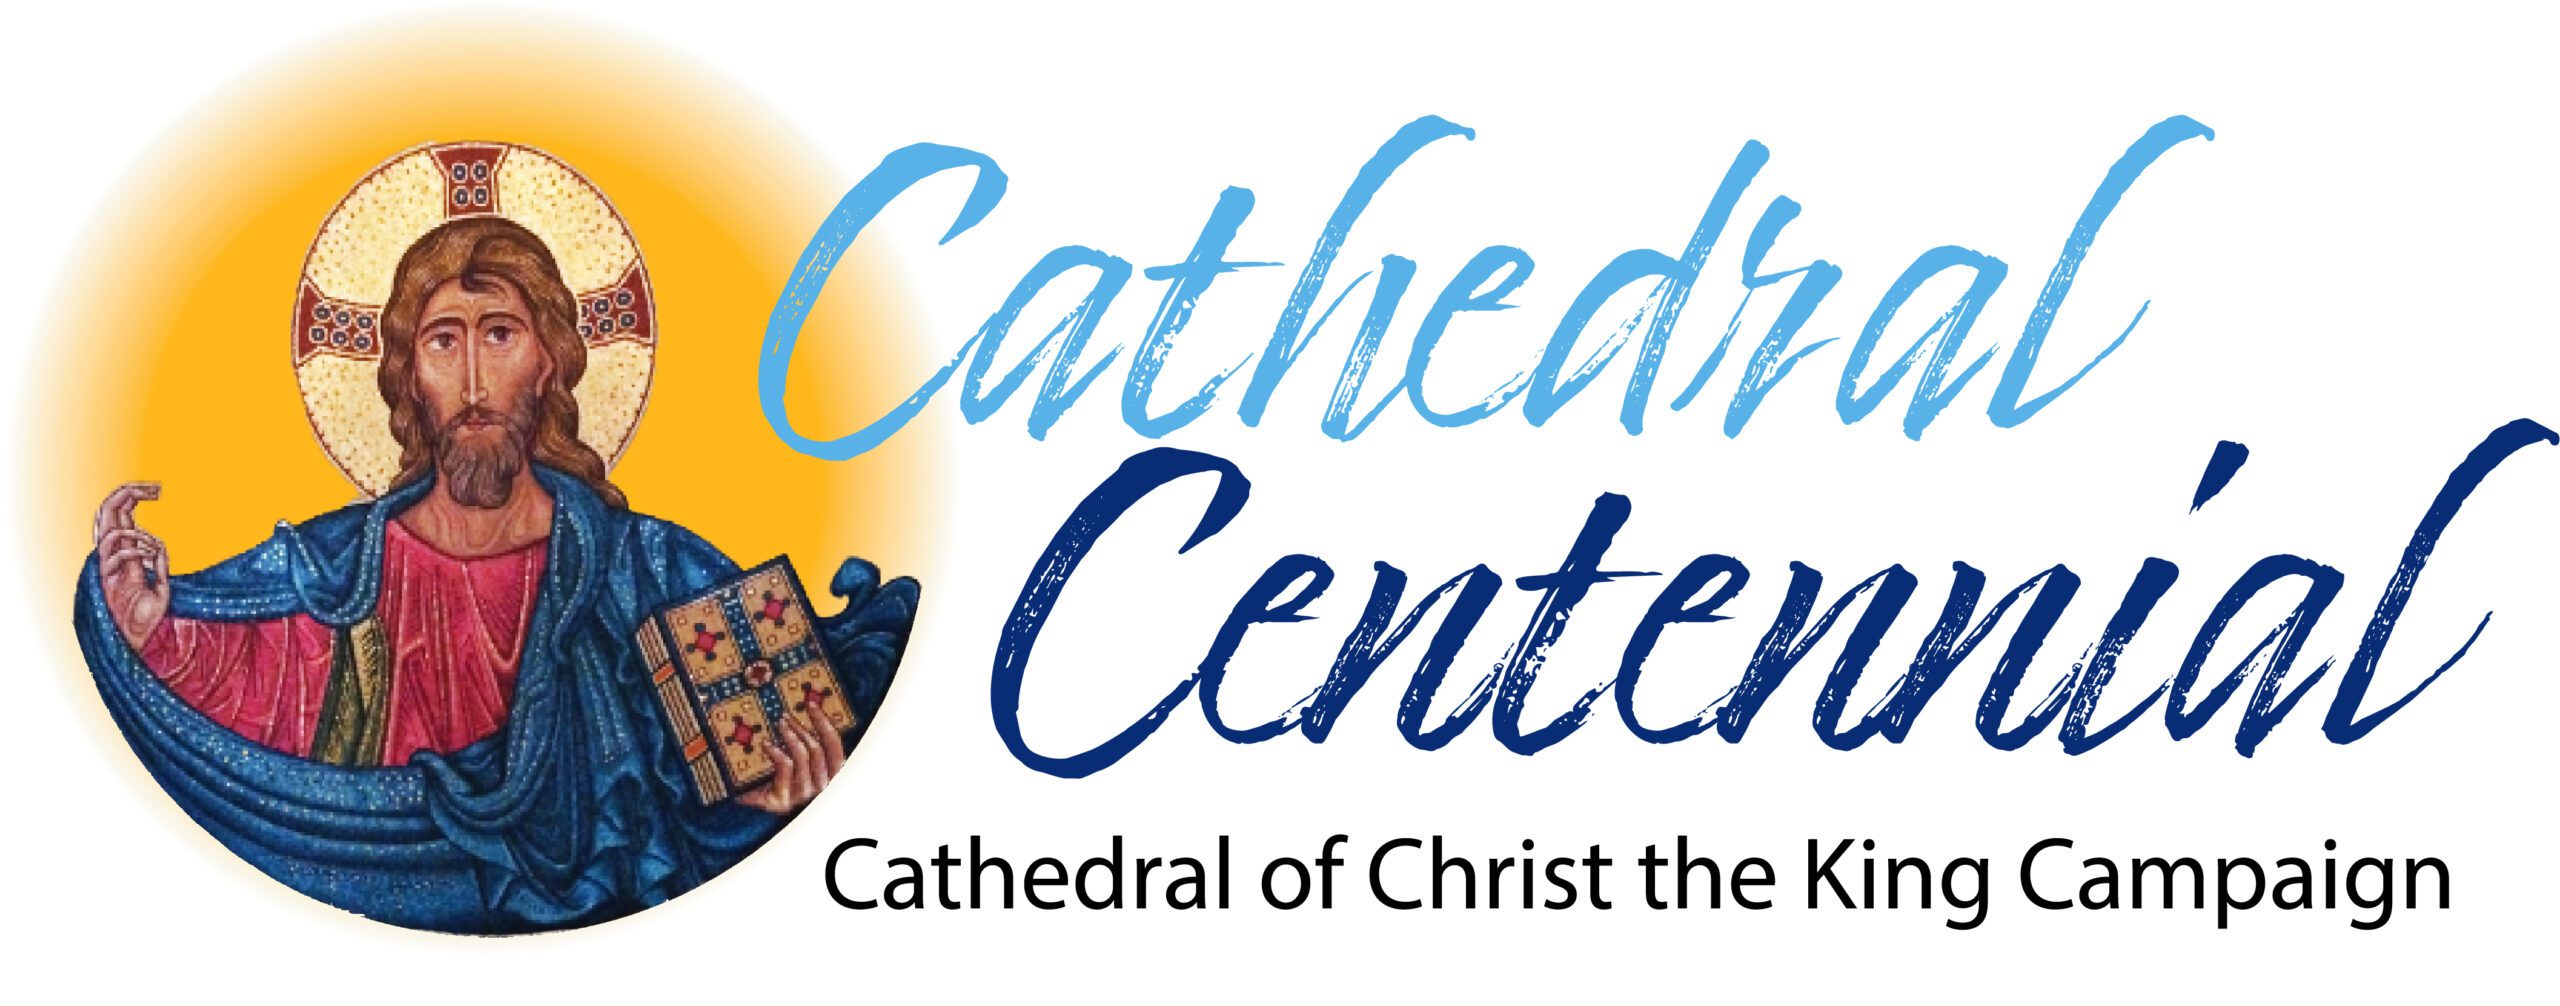 Cathedral Centennial Campaign